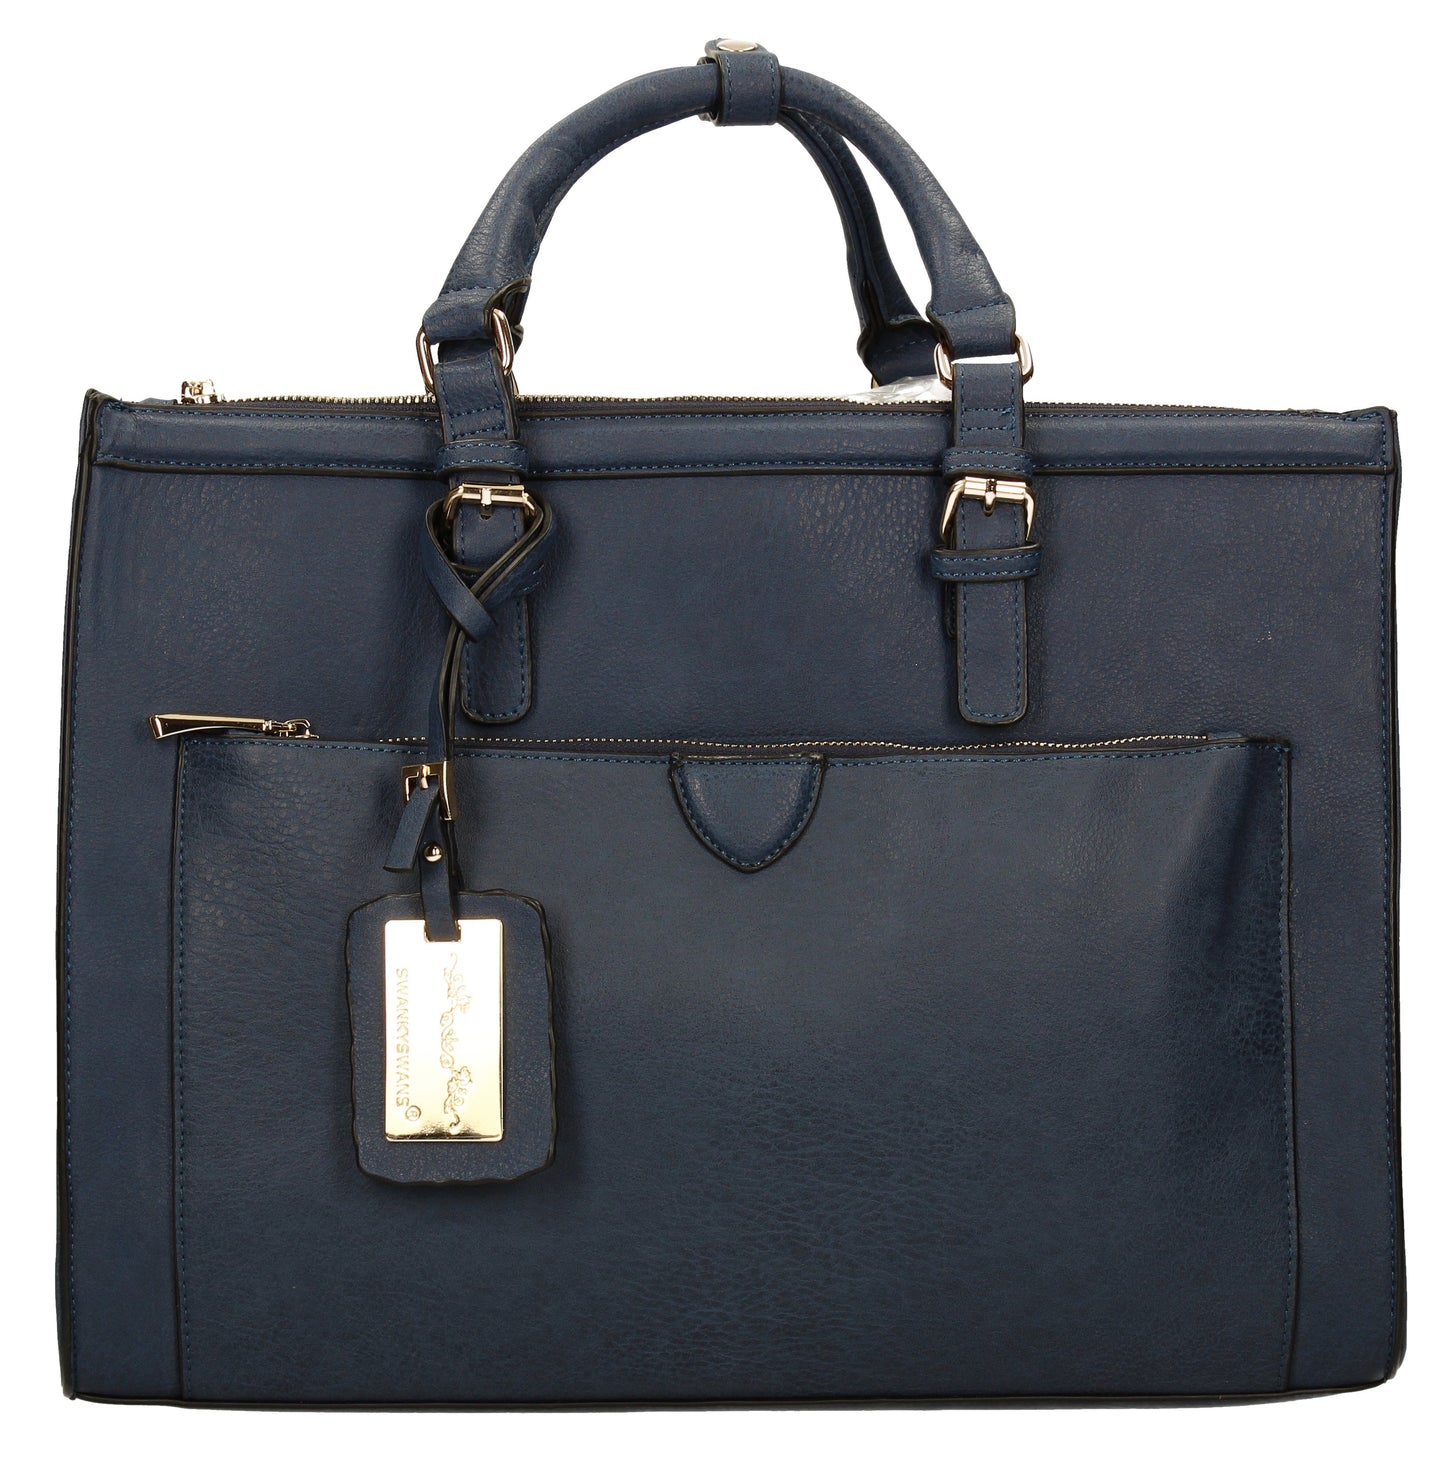 Swanky Swans Marcella Cosmo Handbag NavyPerfect for School, Weddings, Day out!